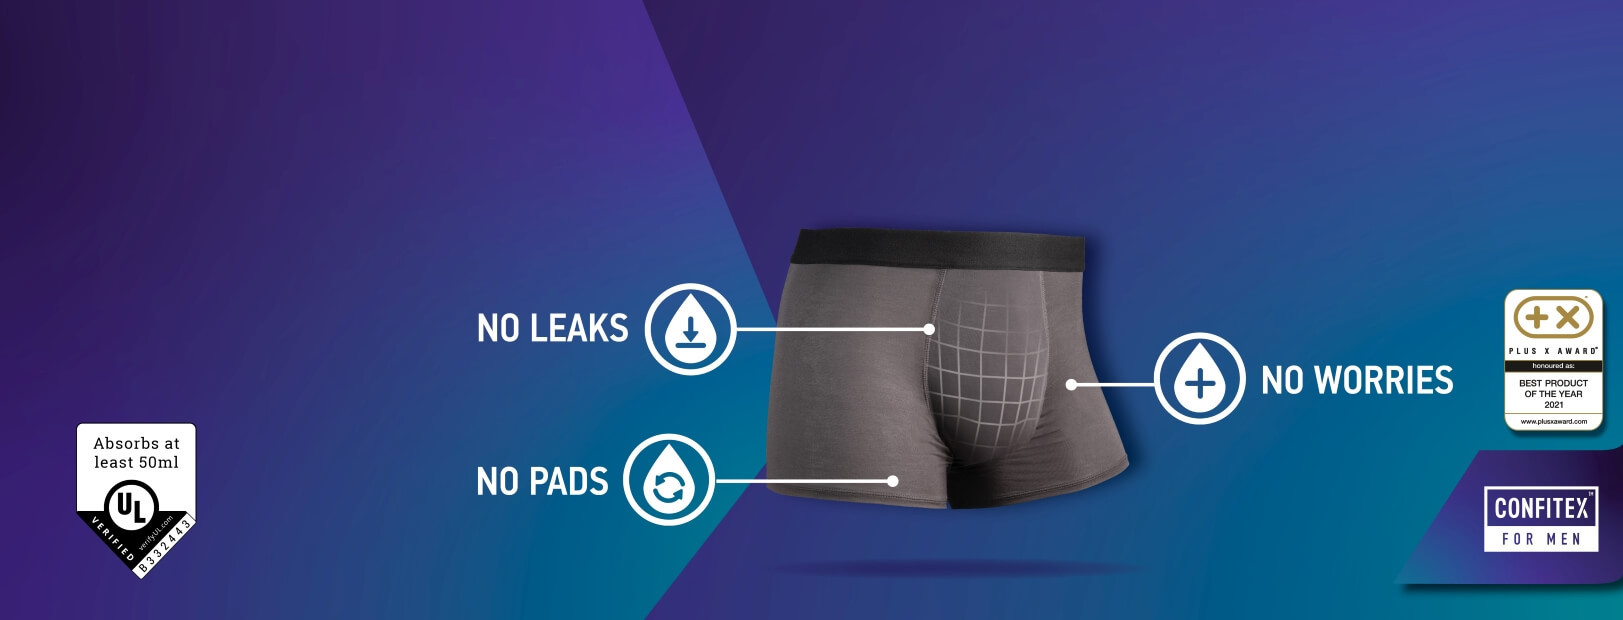 Infographic showing benefits of Confitex for Men absorbent underwear